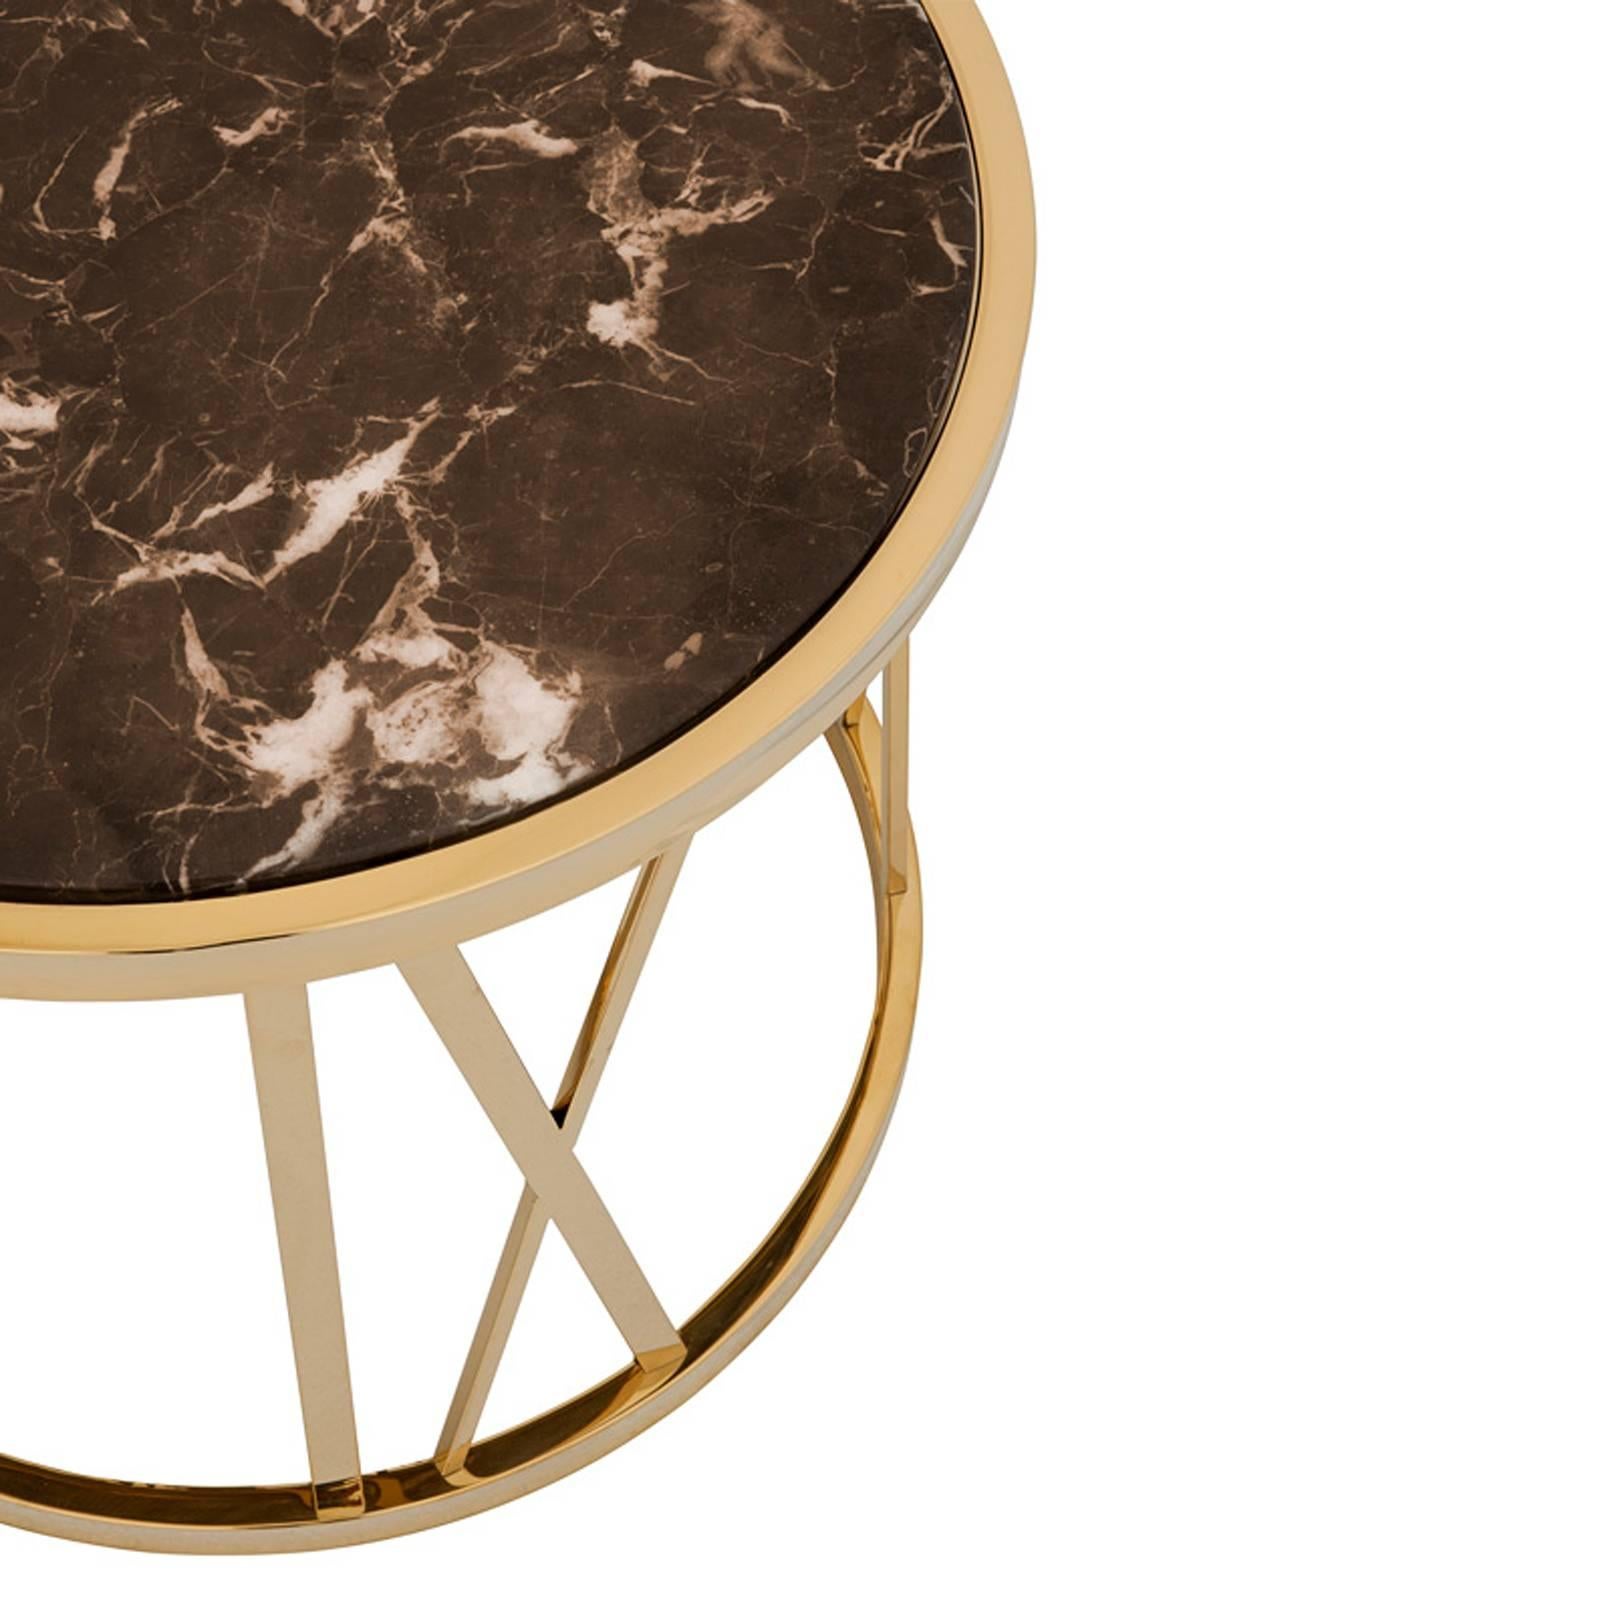 Chinese Romain Side Table in Gold Finish and Brown Marble